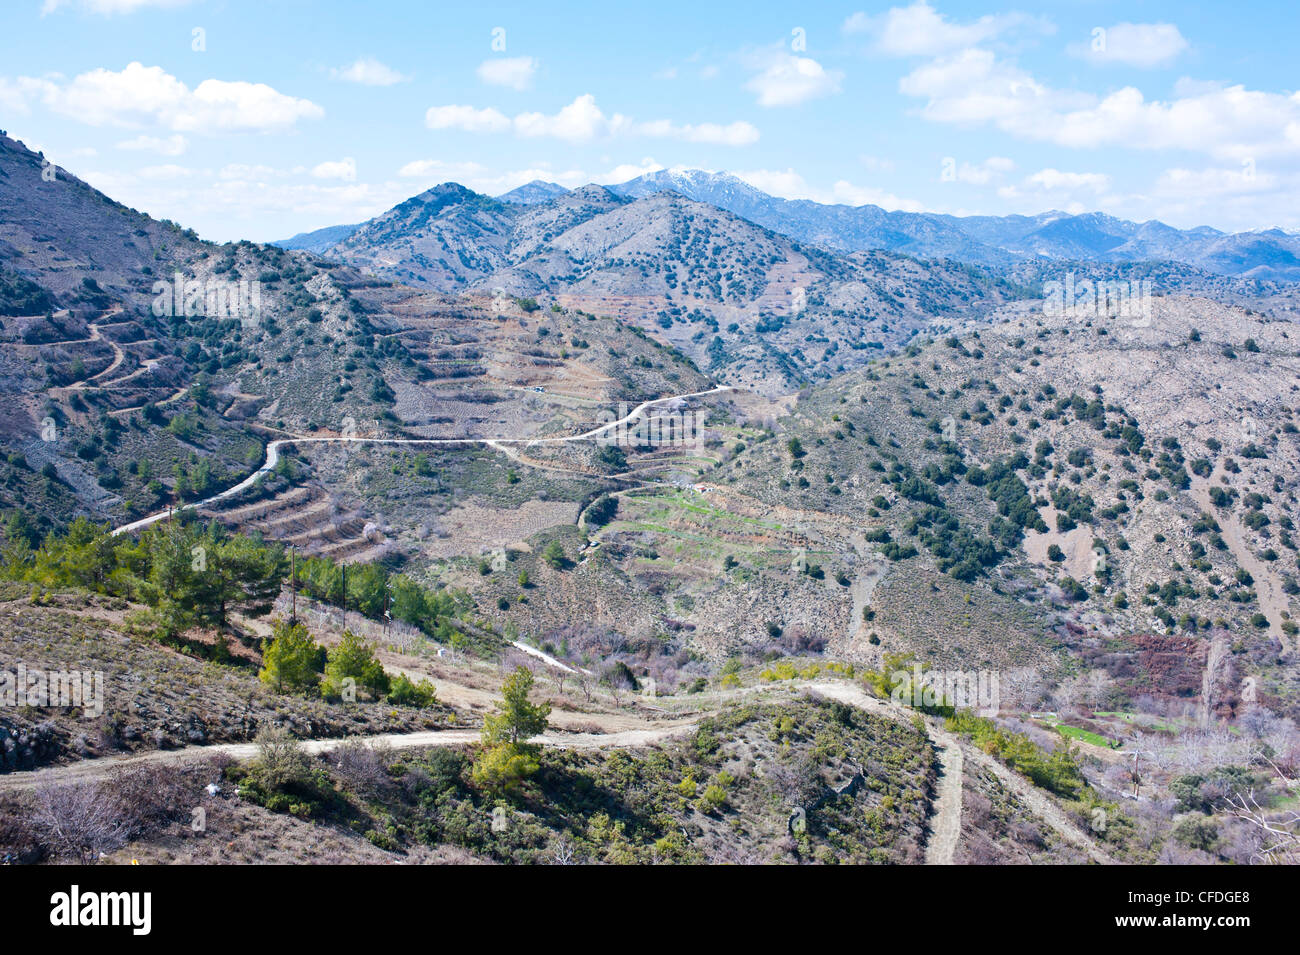 View over the Troodos mountains, Cyprus, Europe Stock Photo